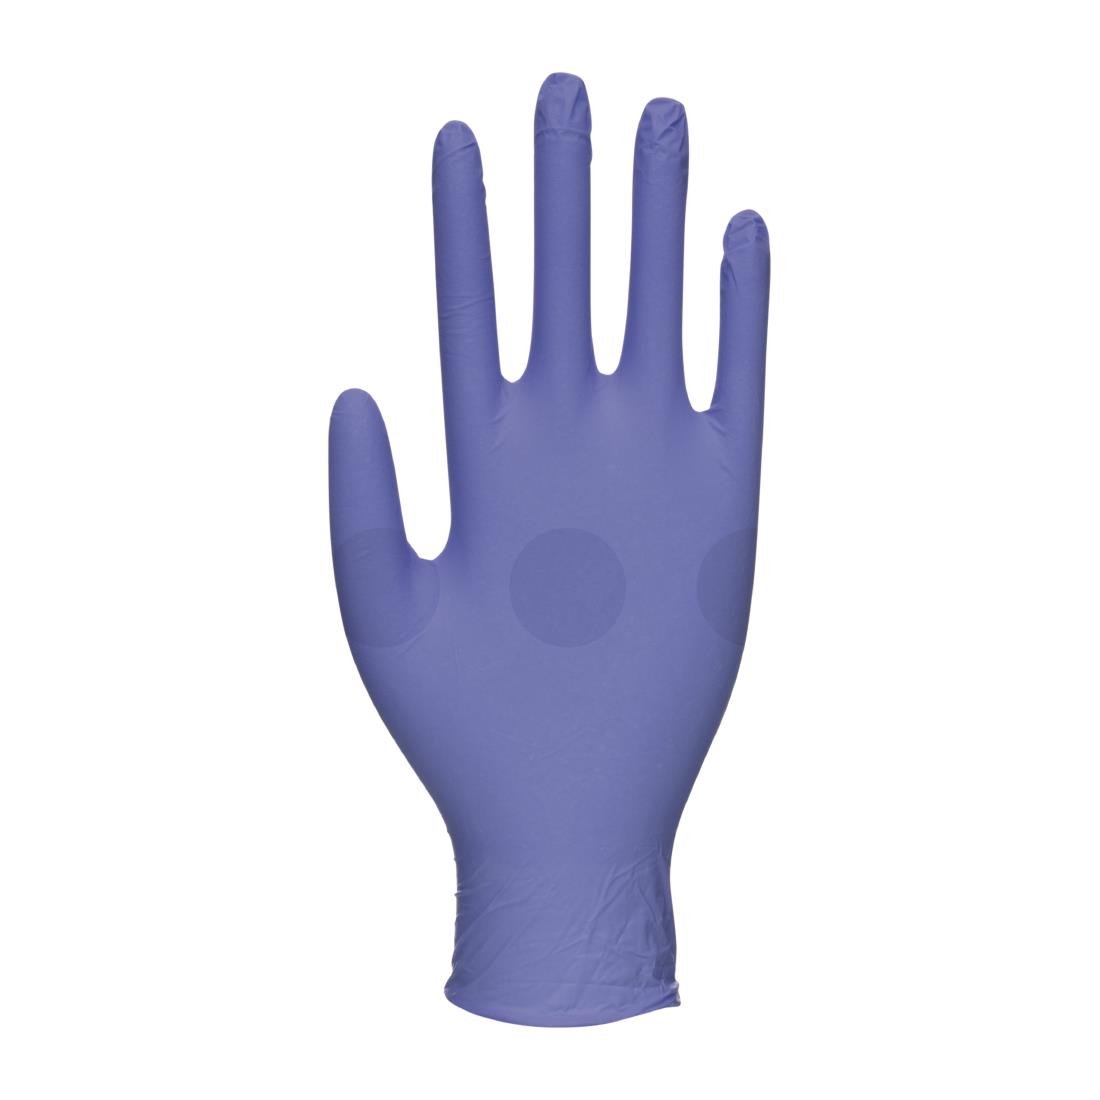 FW844-M Biotouch Single Use Glove Violet Blue Nitrile Powder Free Size Medium (Pack of 100)